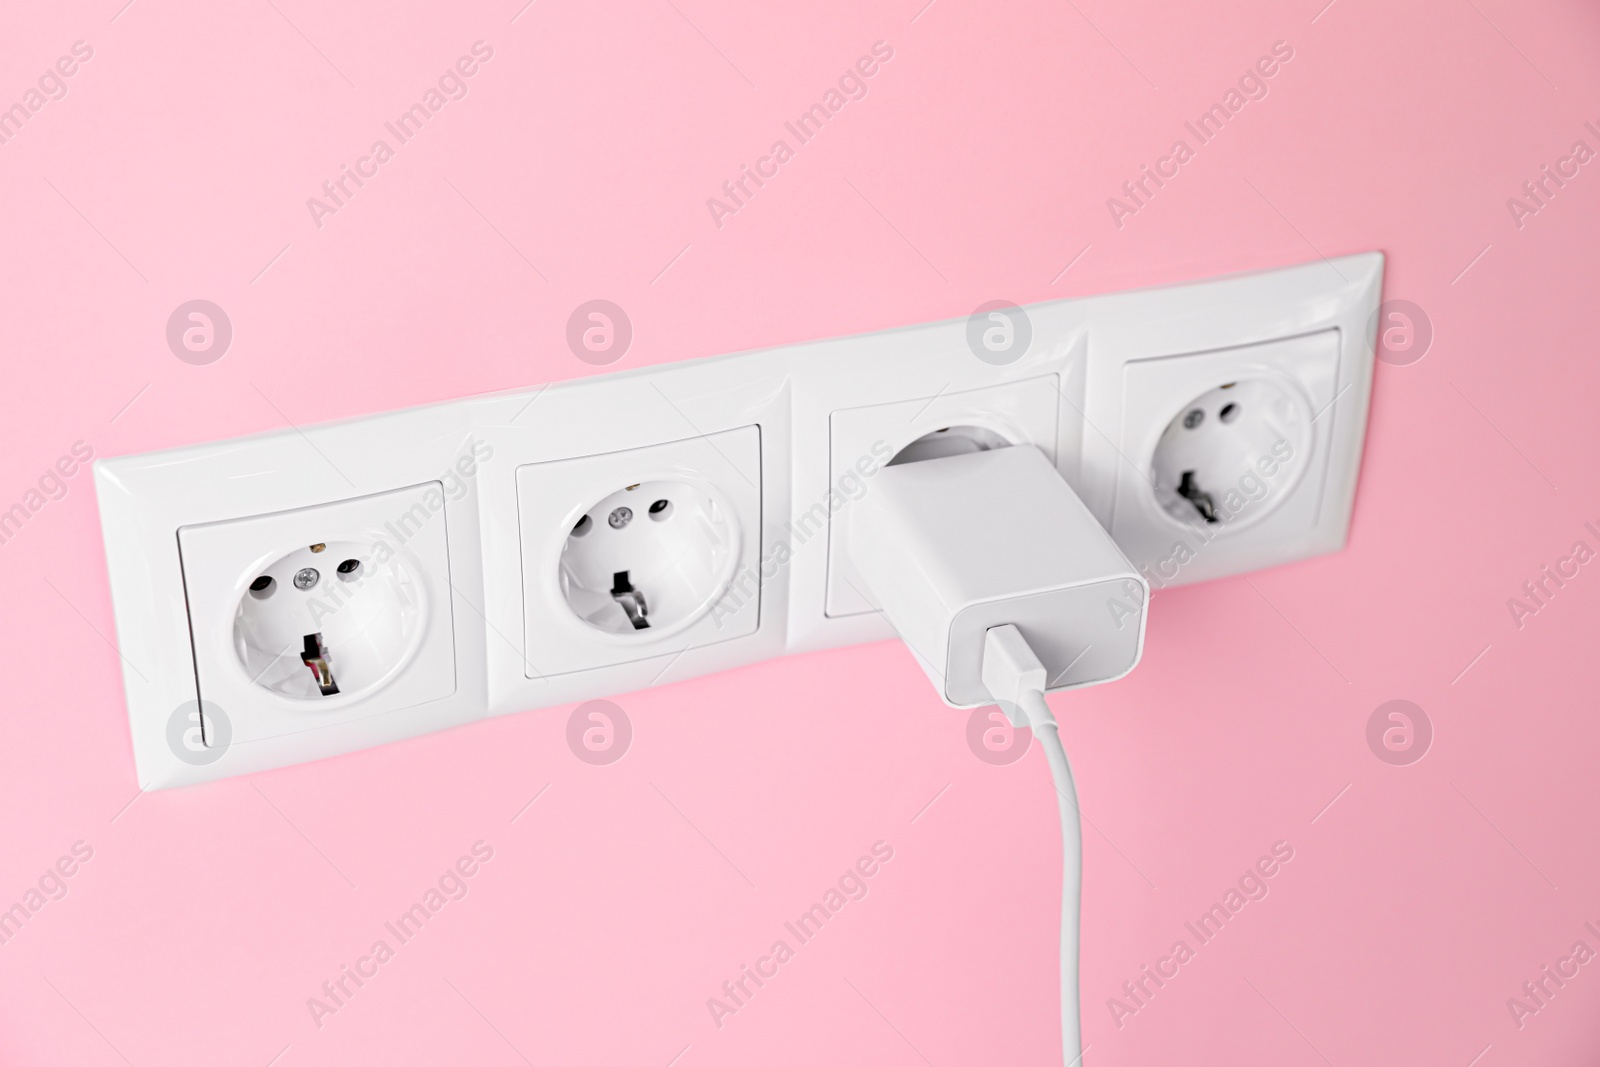 Photo of Charger adapter plugged into power sockets on pink wall. Electrical supply